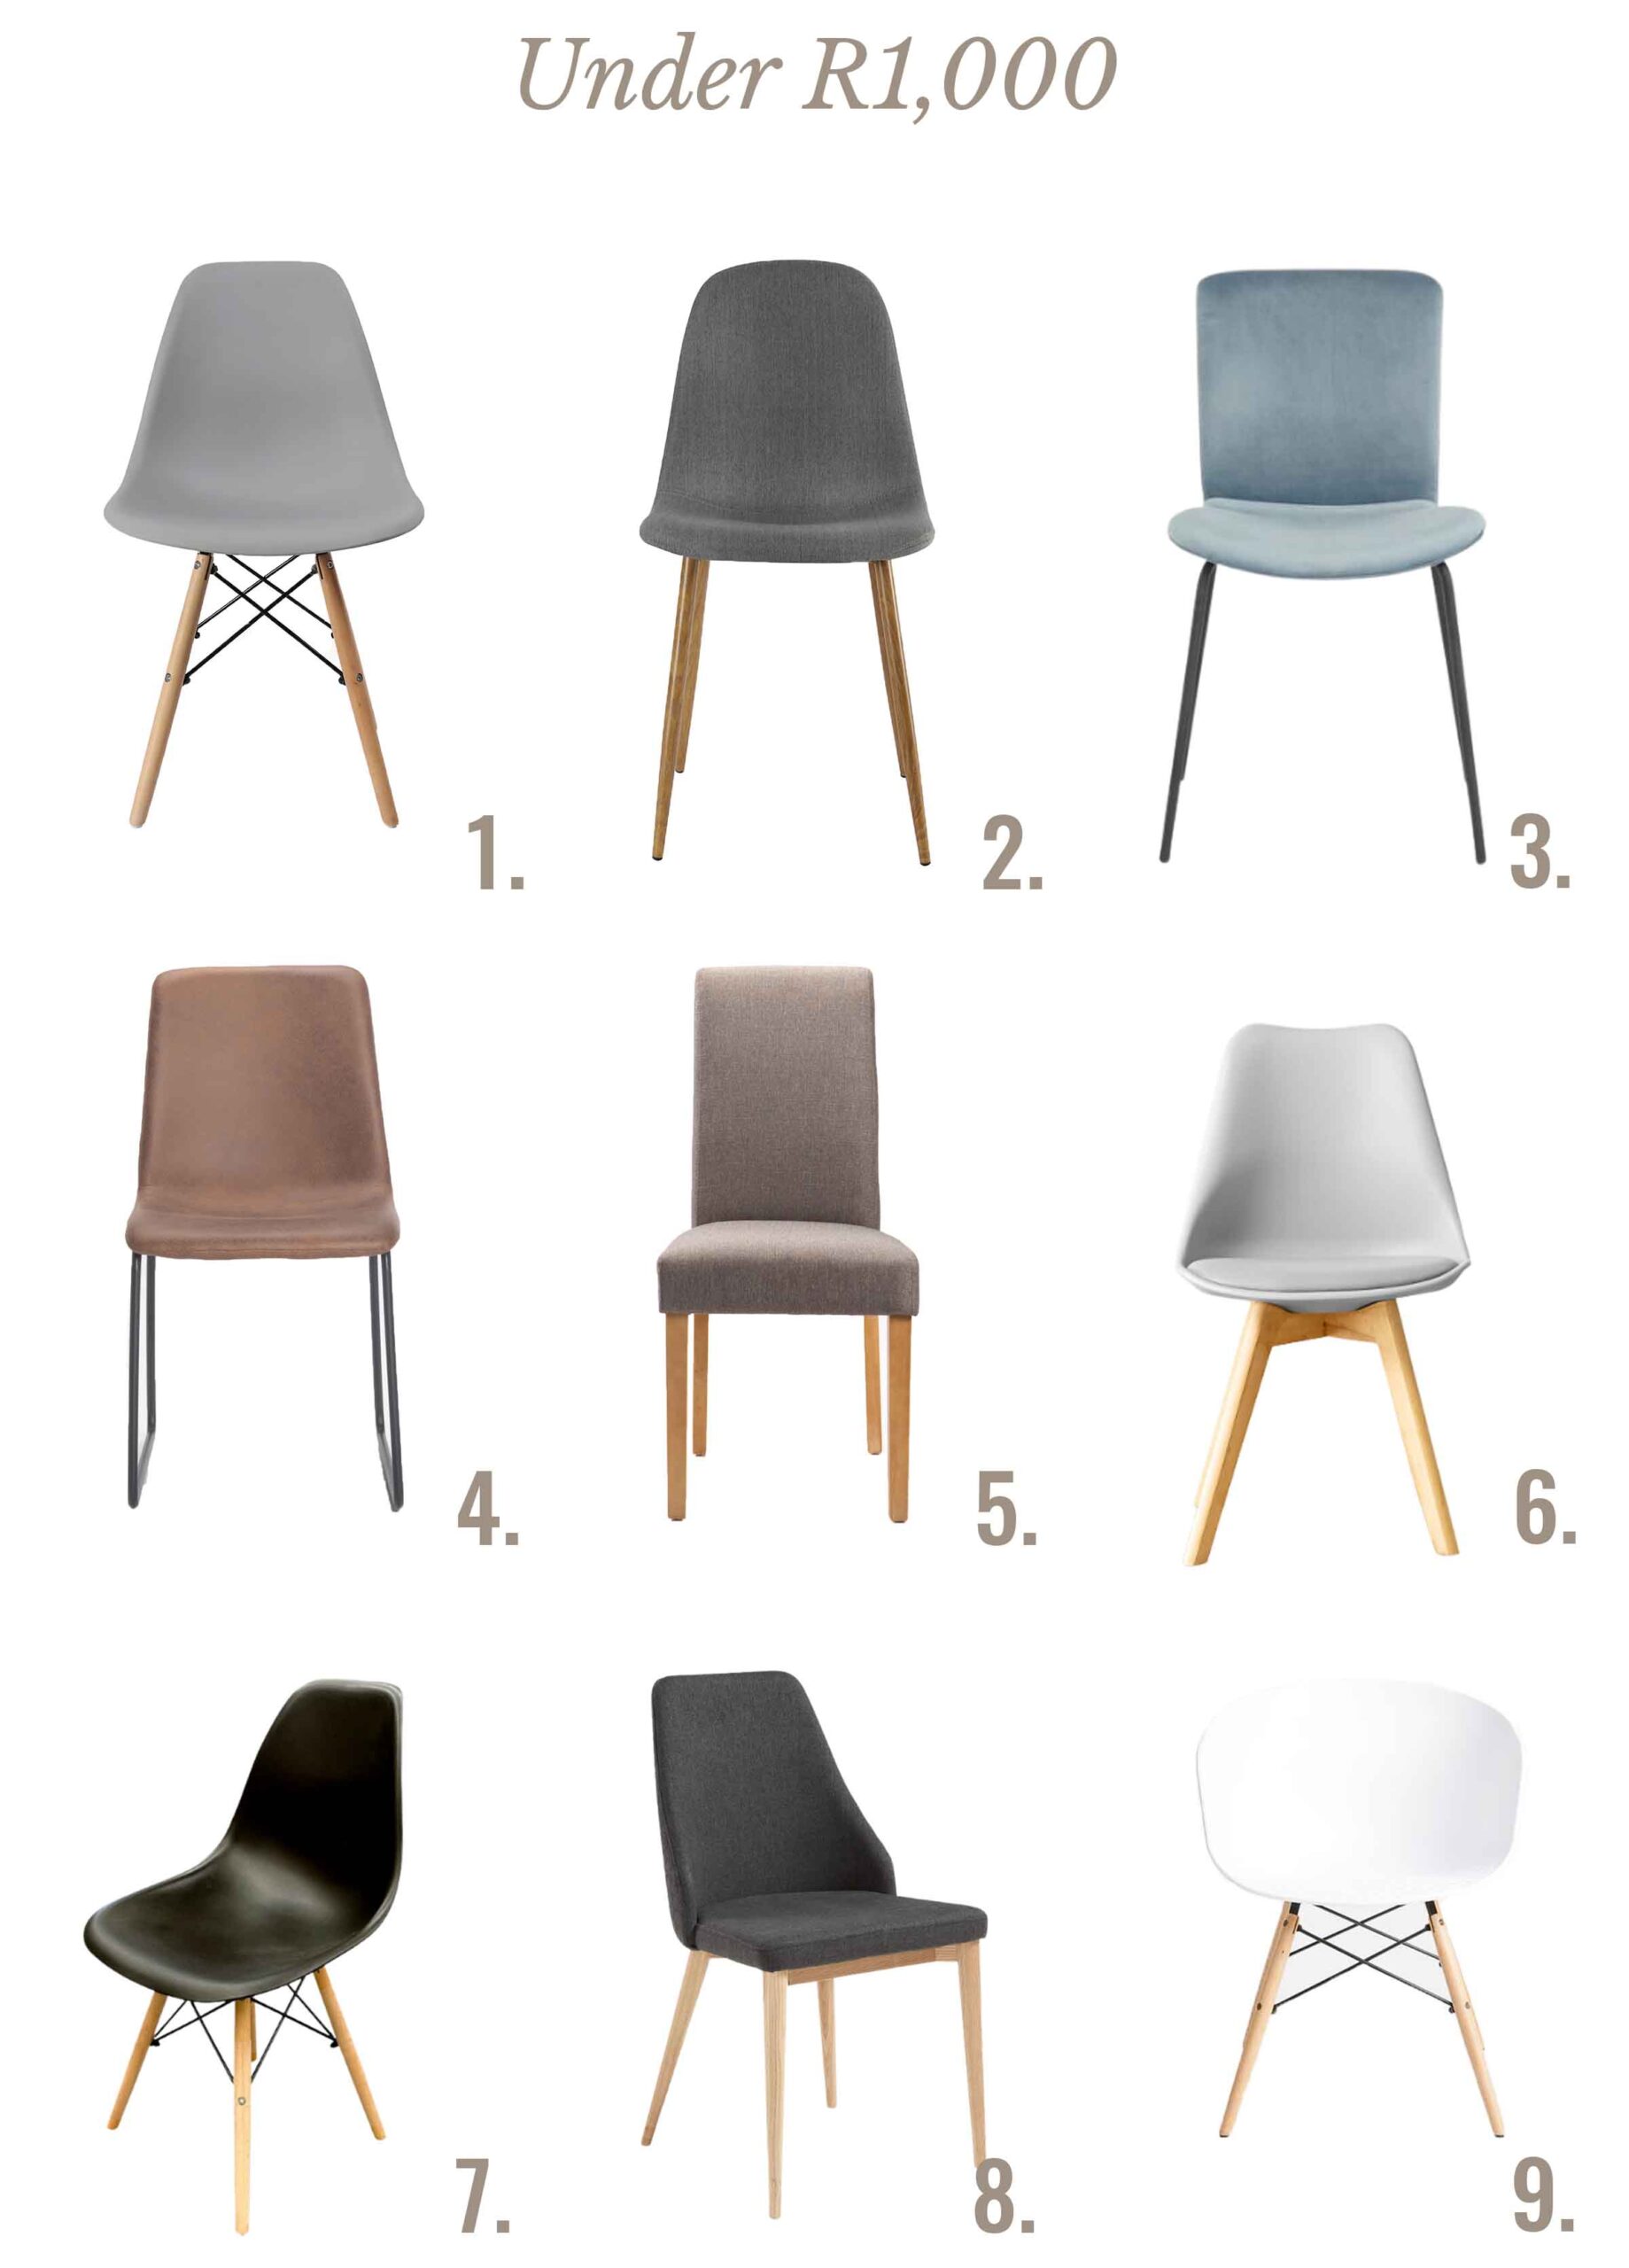 Dining Chairs Under R1000